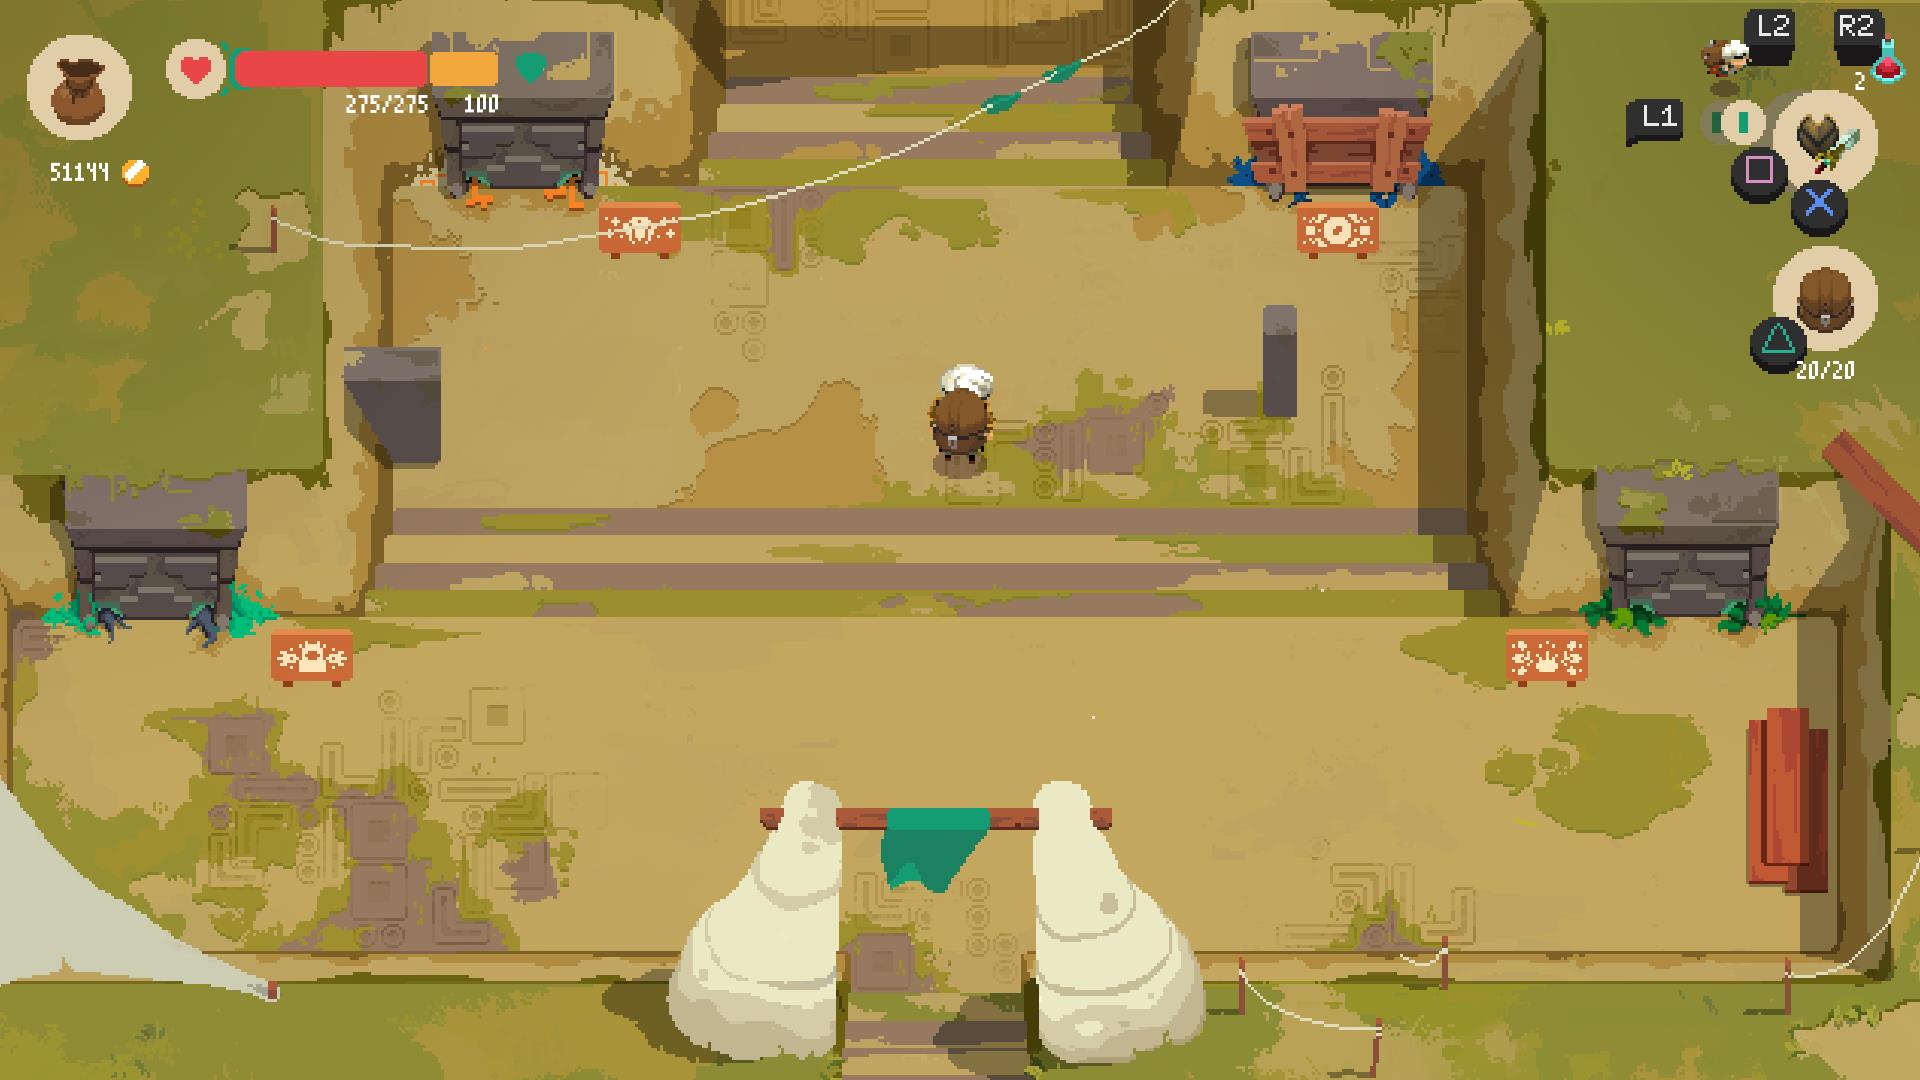 merge games moonlighter for sony ps4